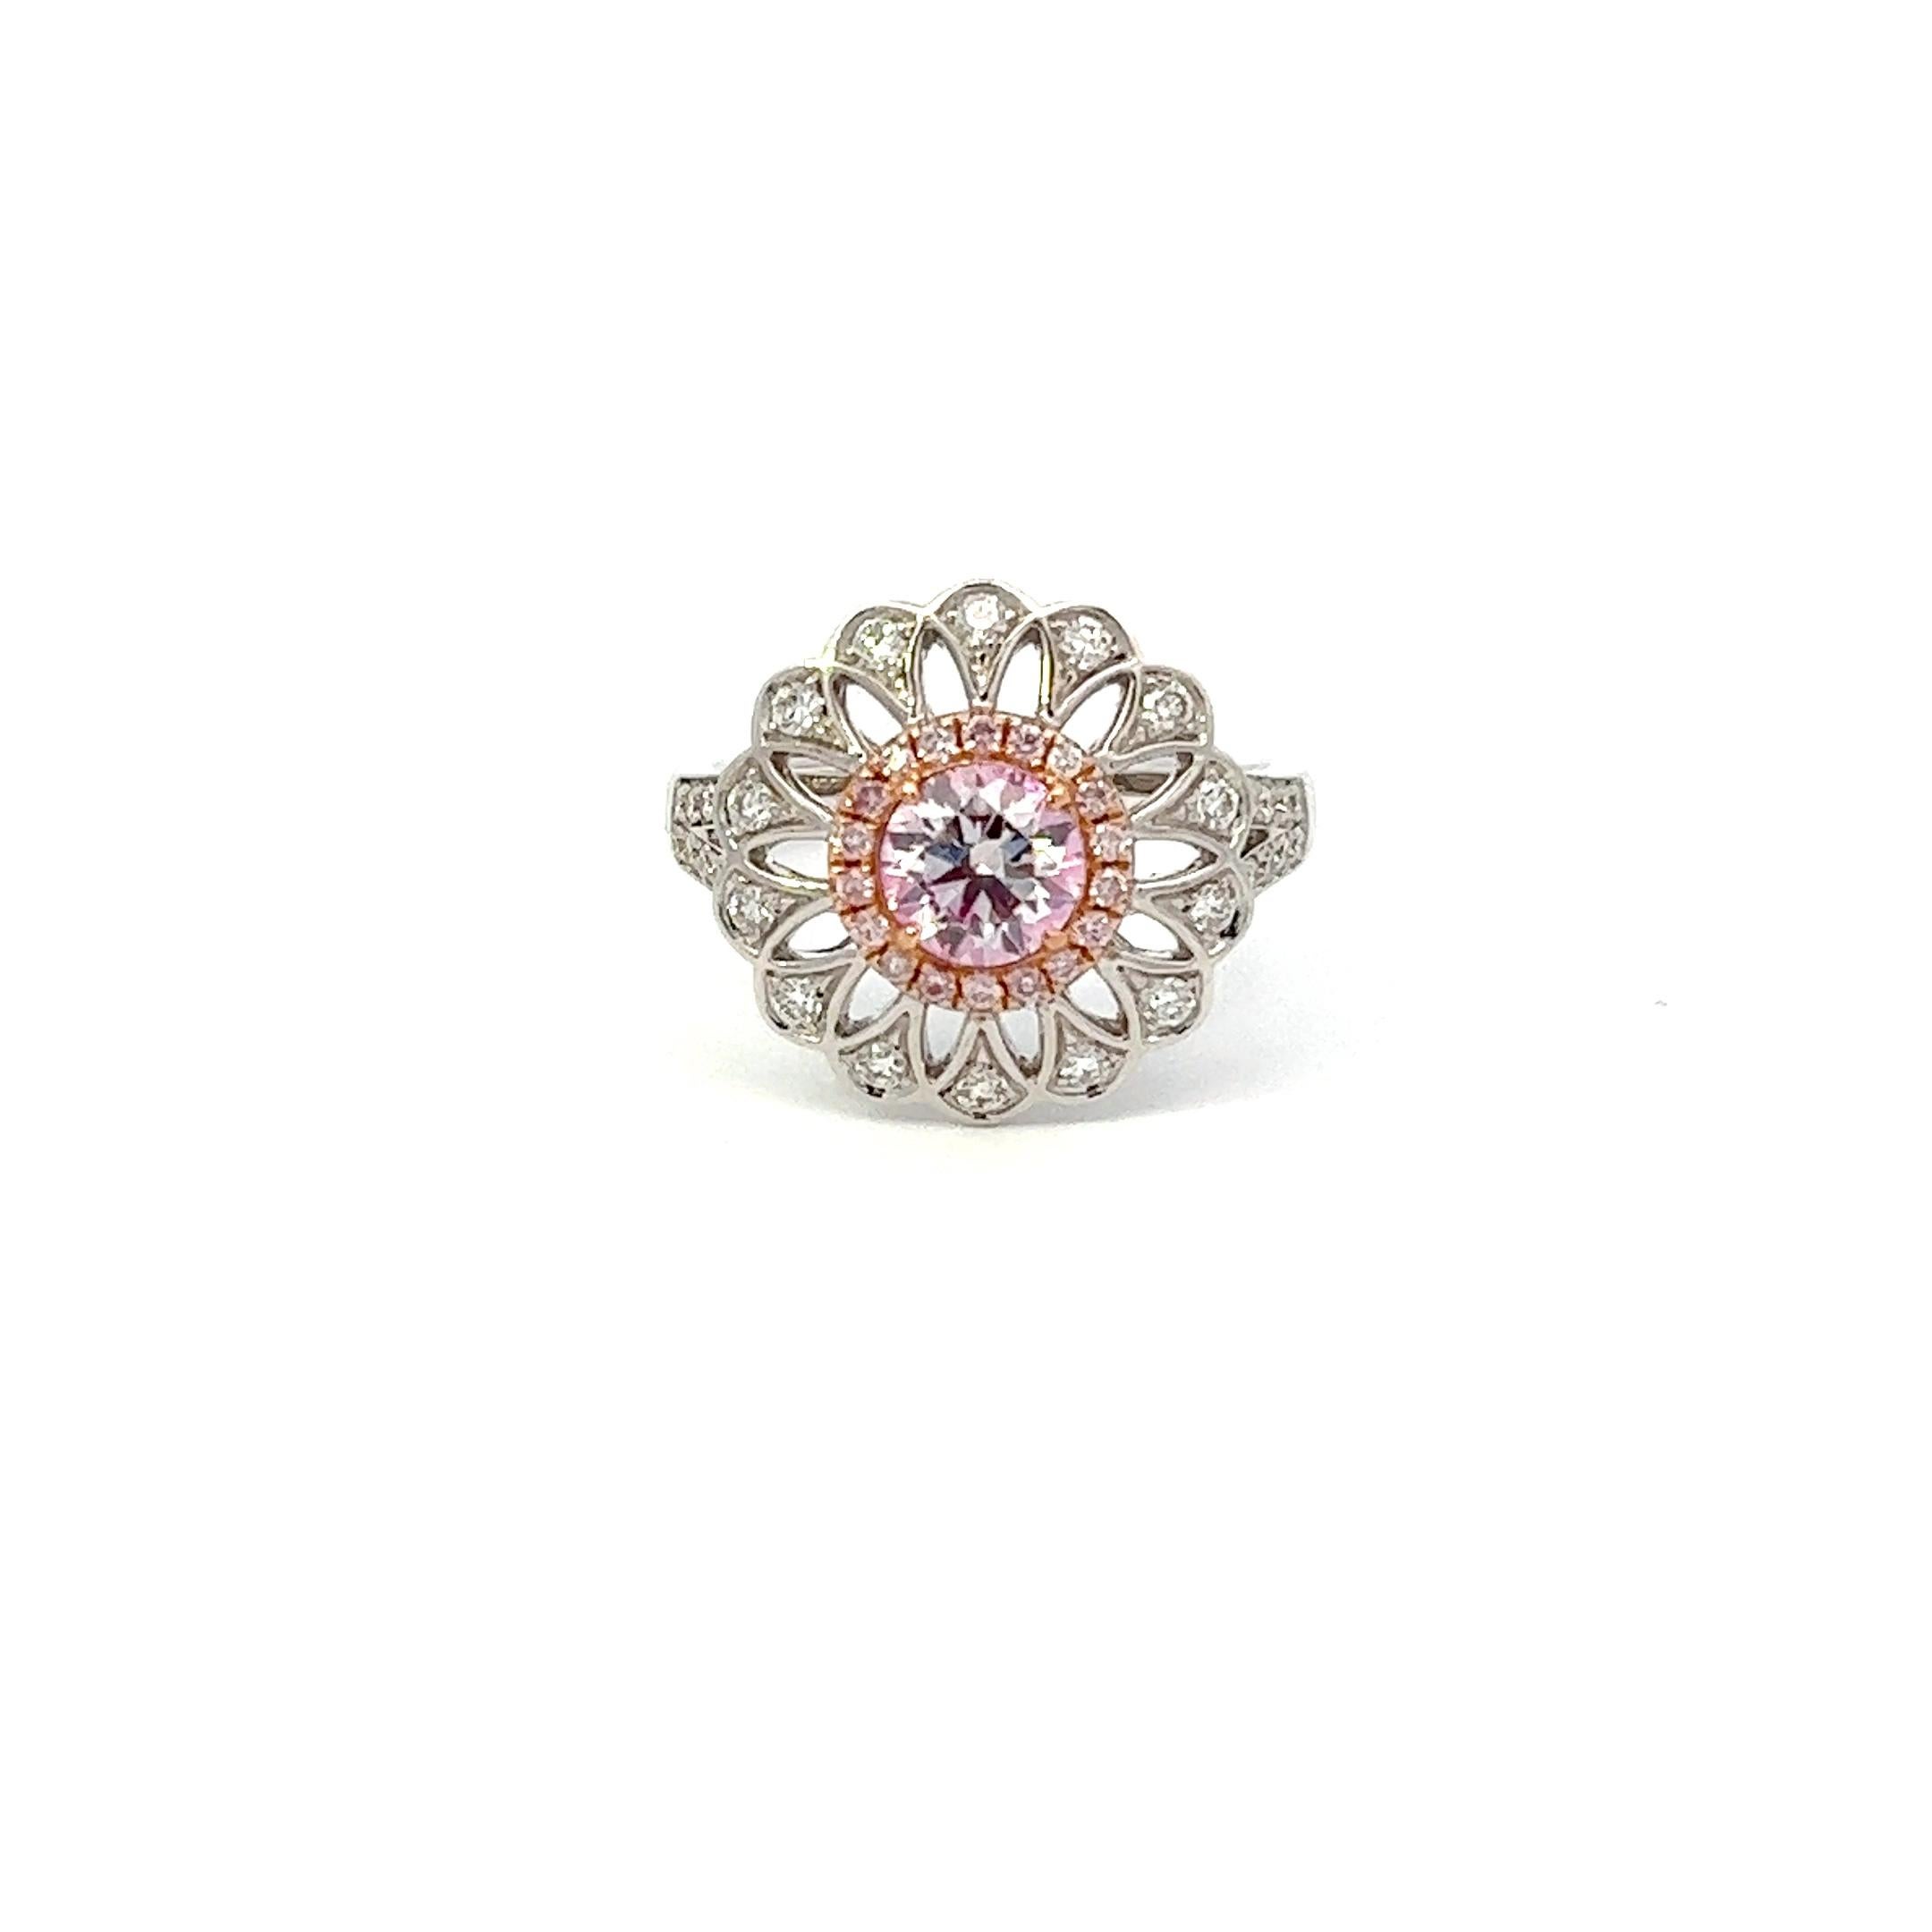 Center: 0.72ct Faint Pinkish Brown Round SI1 GIA# 2406231568
Setting: 18k White Gold 0.46ctw Pink and White Diamonds

An extremely rare and stunning natural pink diamond center. Pink Diamonds account for less than 0.01% of all diamonds mined in the